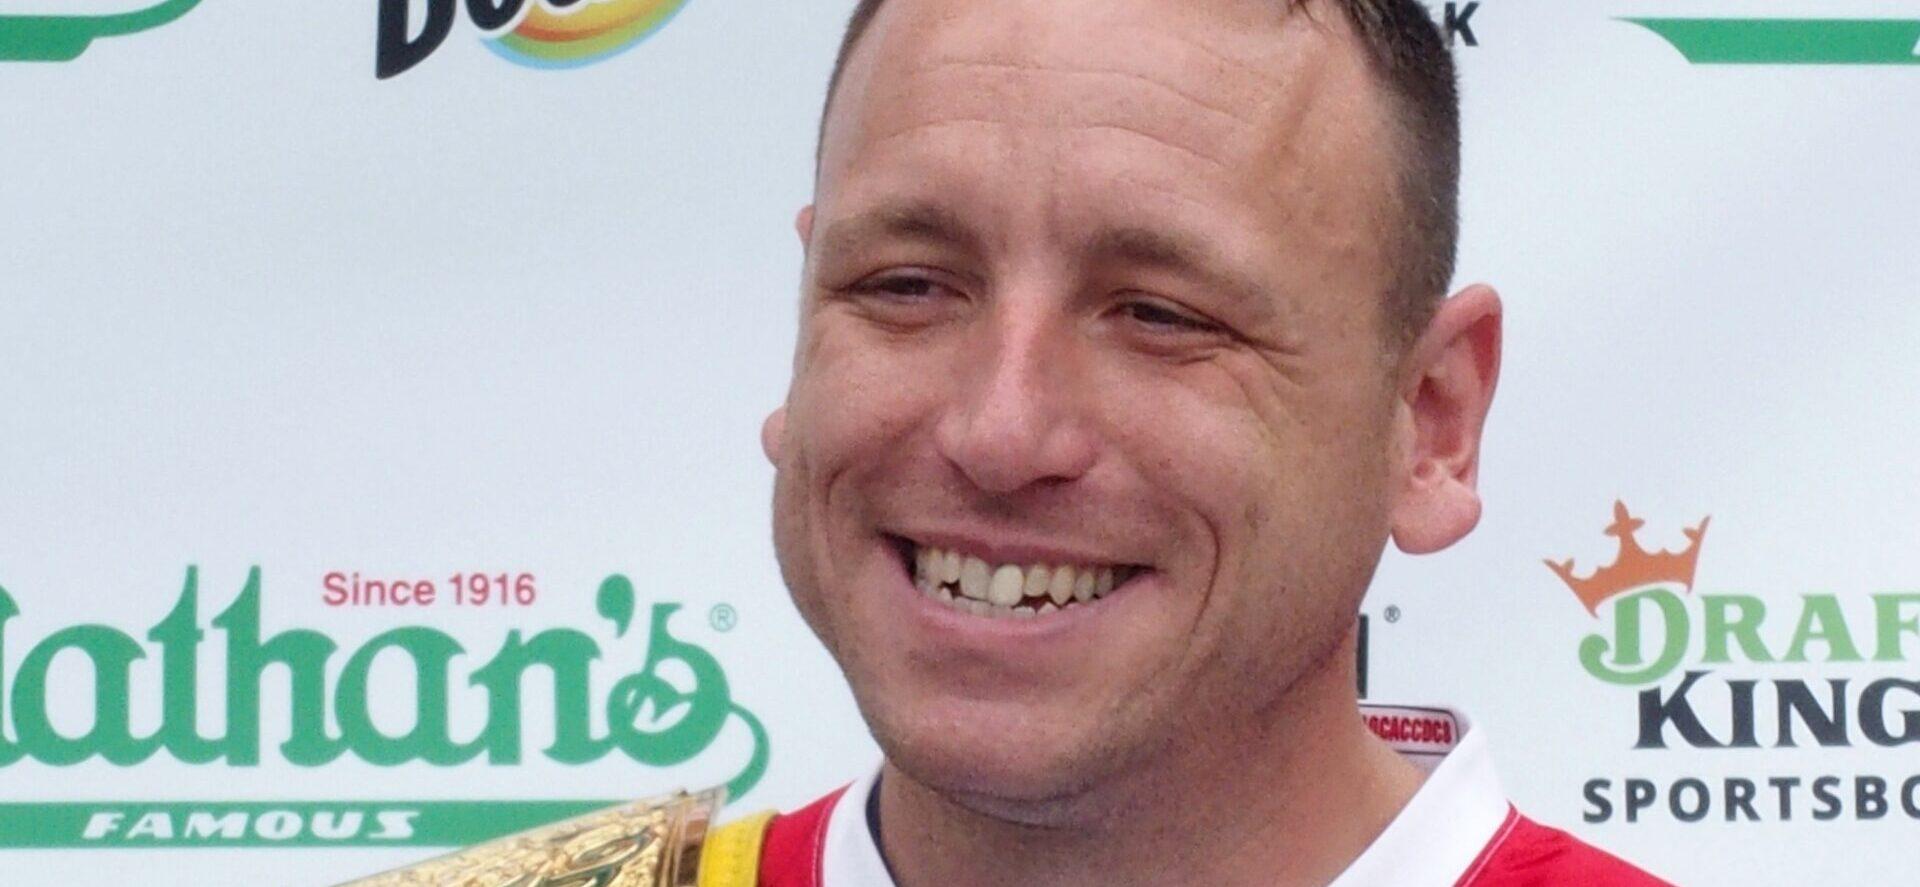 Joey Chestnut at Nathan's July 4th Hot Dog Eating Contest 2021